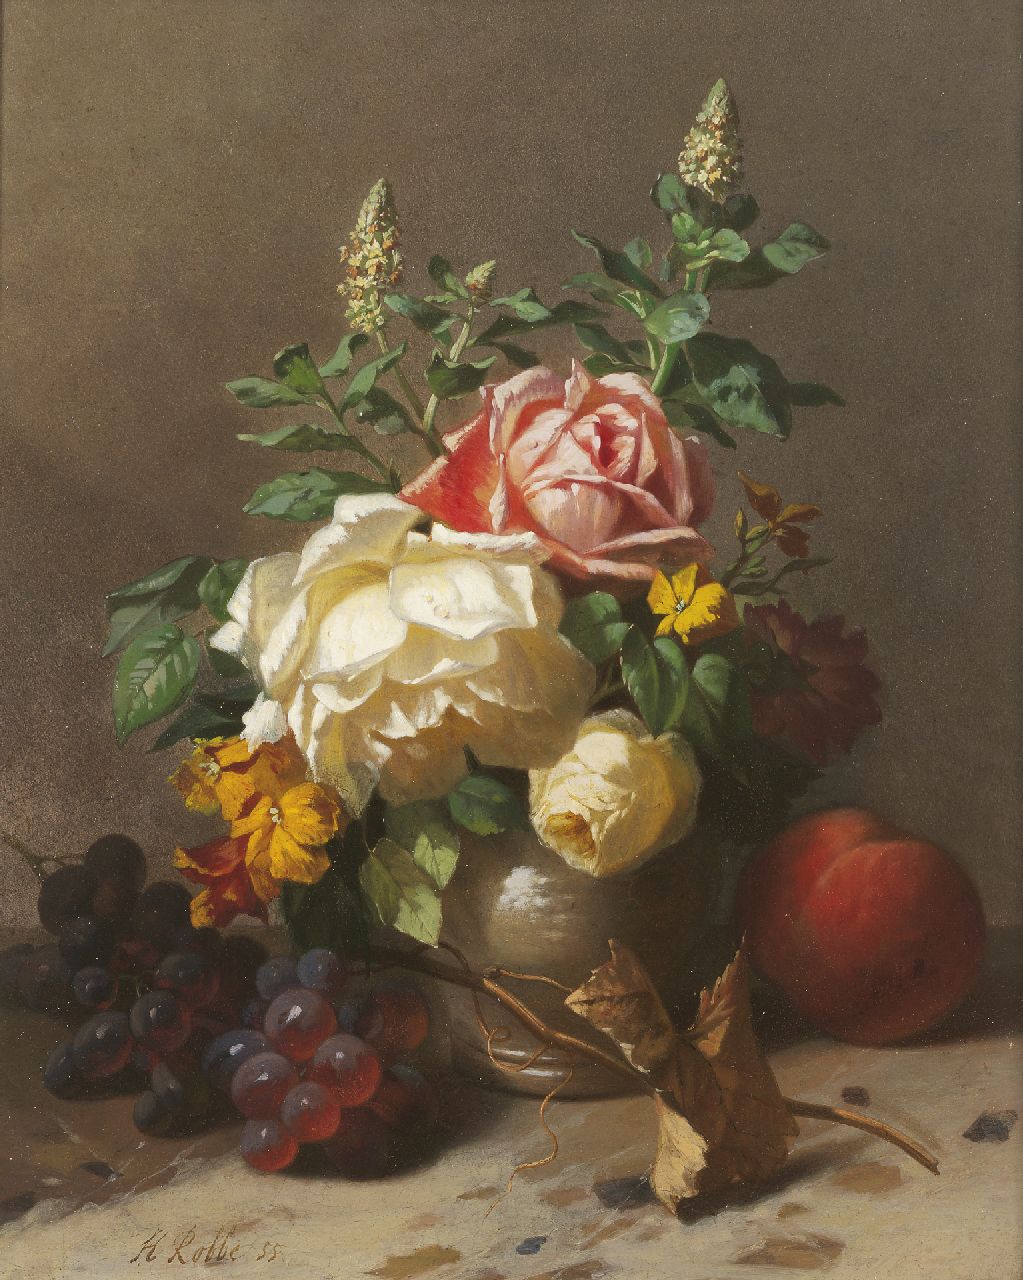 Henri Alexander Robbe | A flower still life with grapes and a peach, Öl auf Holz, 40,6 x 32,7 cm, signed l.l. und painted '55